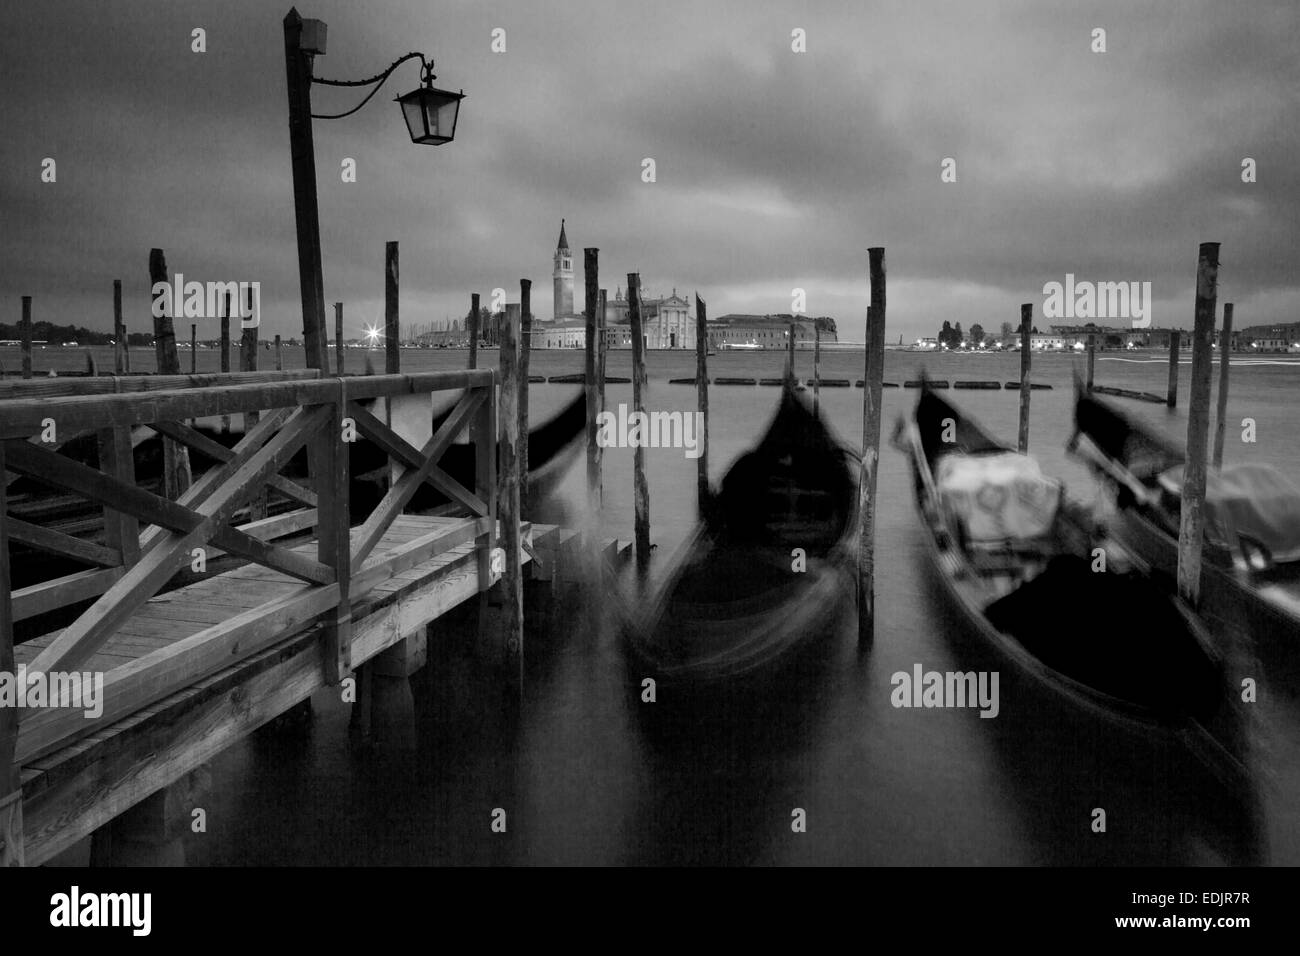 Black and white image of gondolas at the dock in Venice, Italy Stock Photo